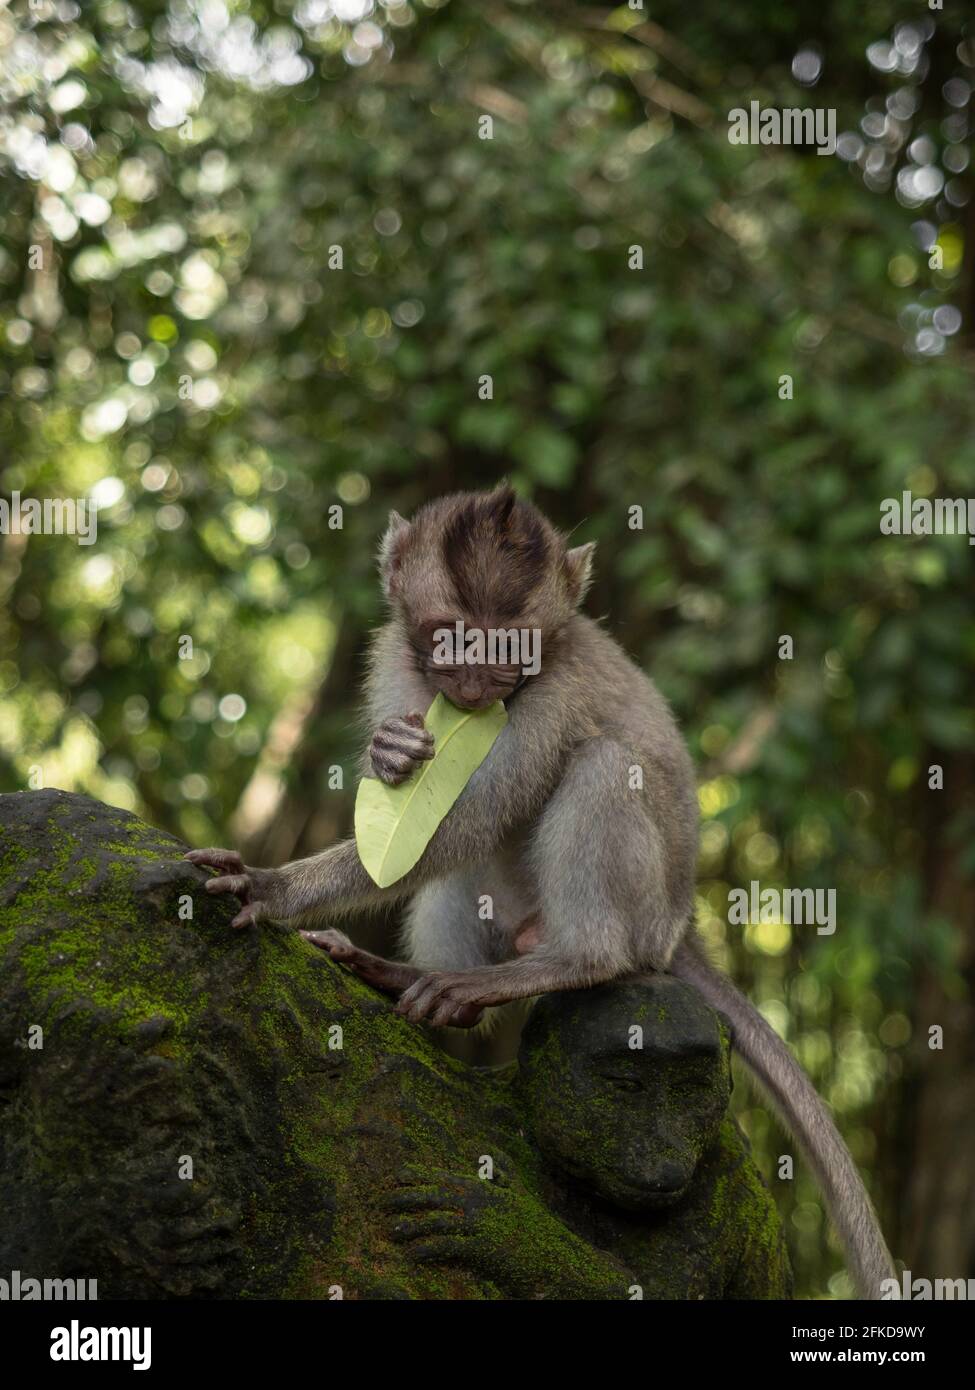 A monkey helped harvest and husking the coconut. Long-tailed monkeys or  long-tailed macaque in Pariaman, not just animals that live in the wild,  but these monkeys are also utilized by the local